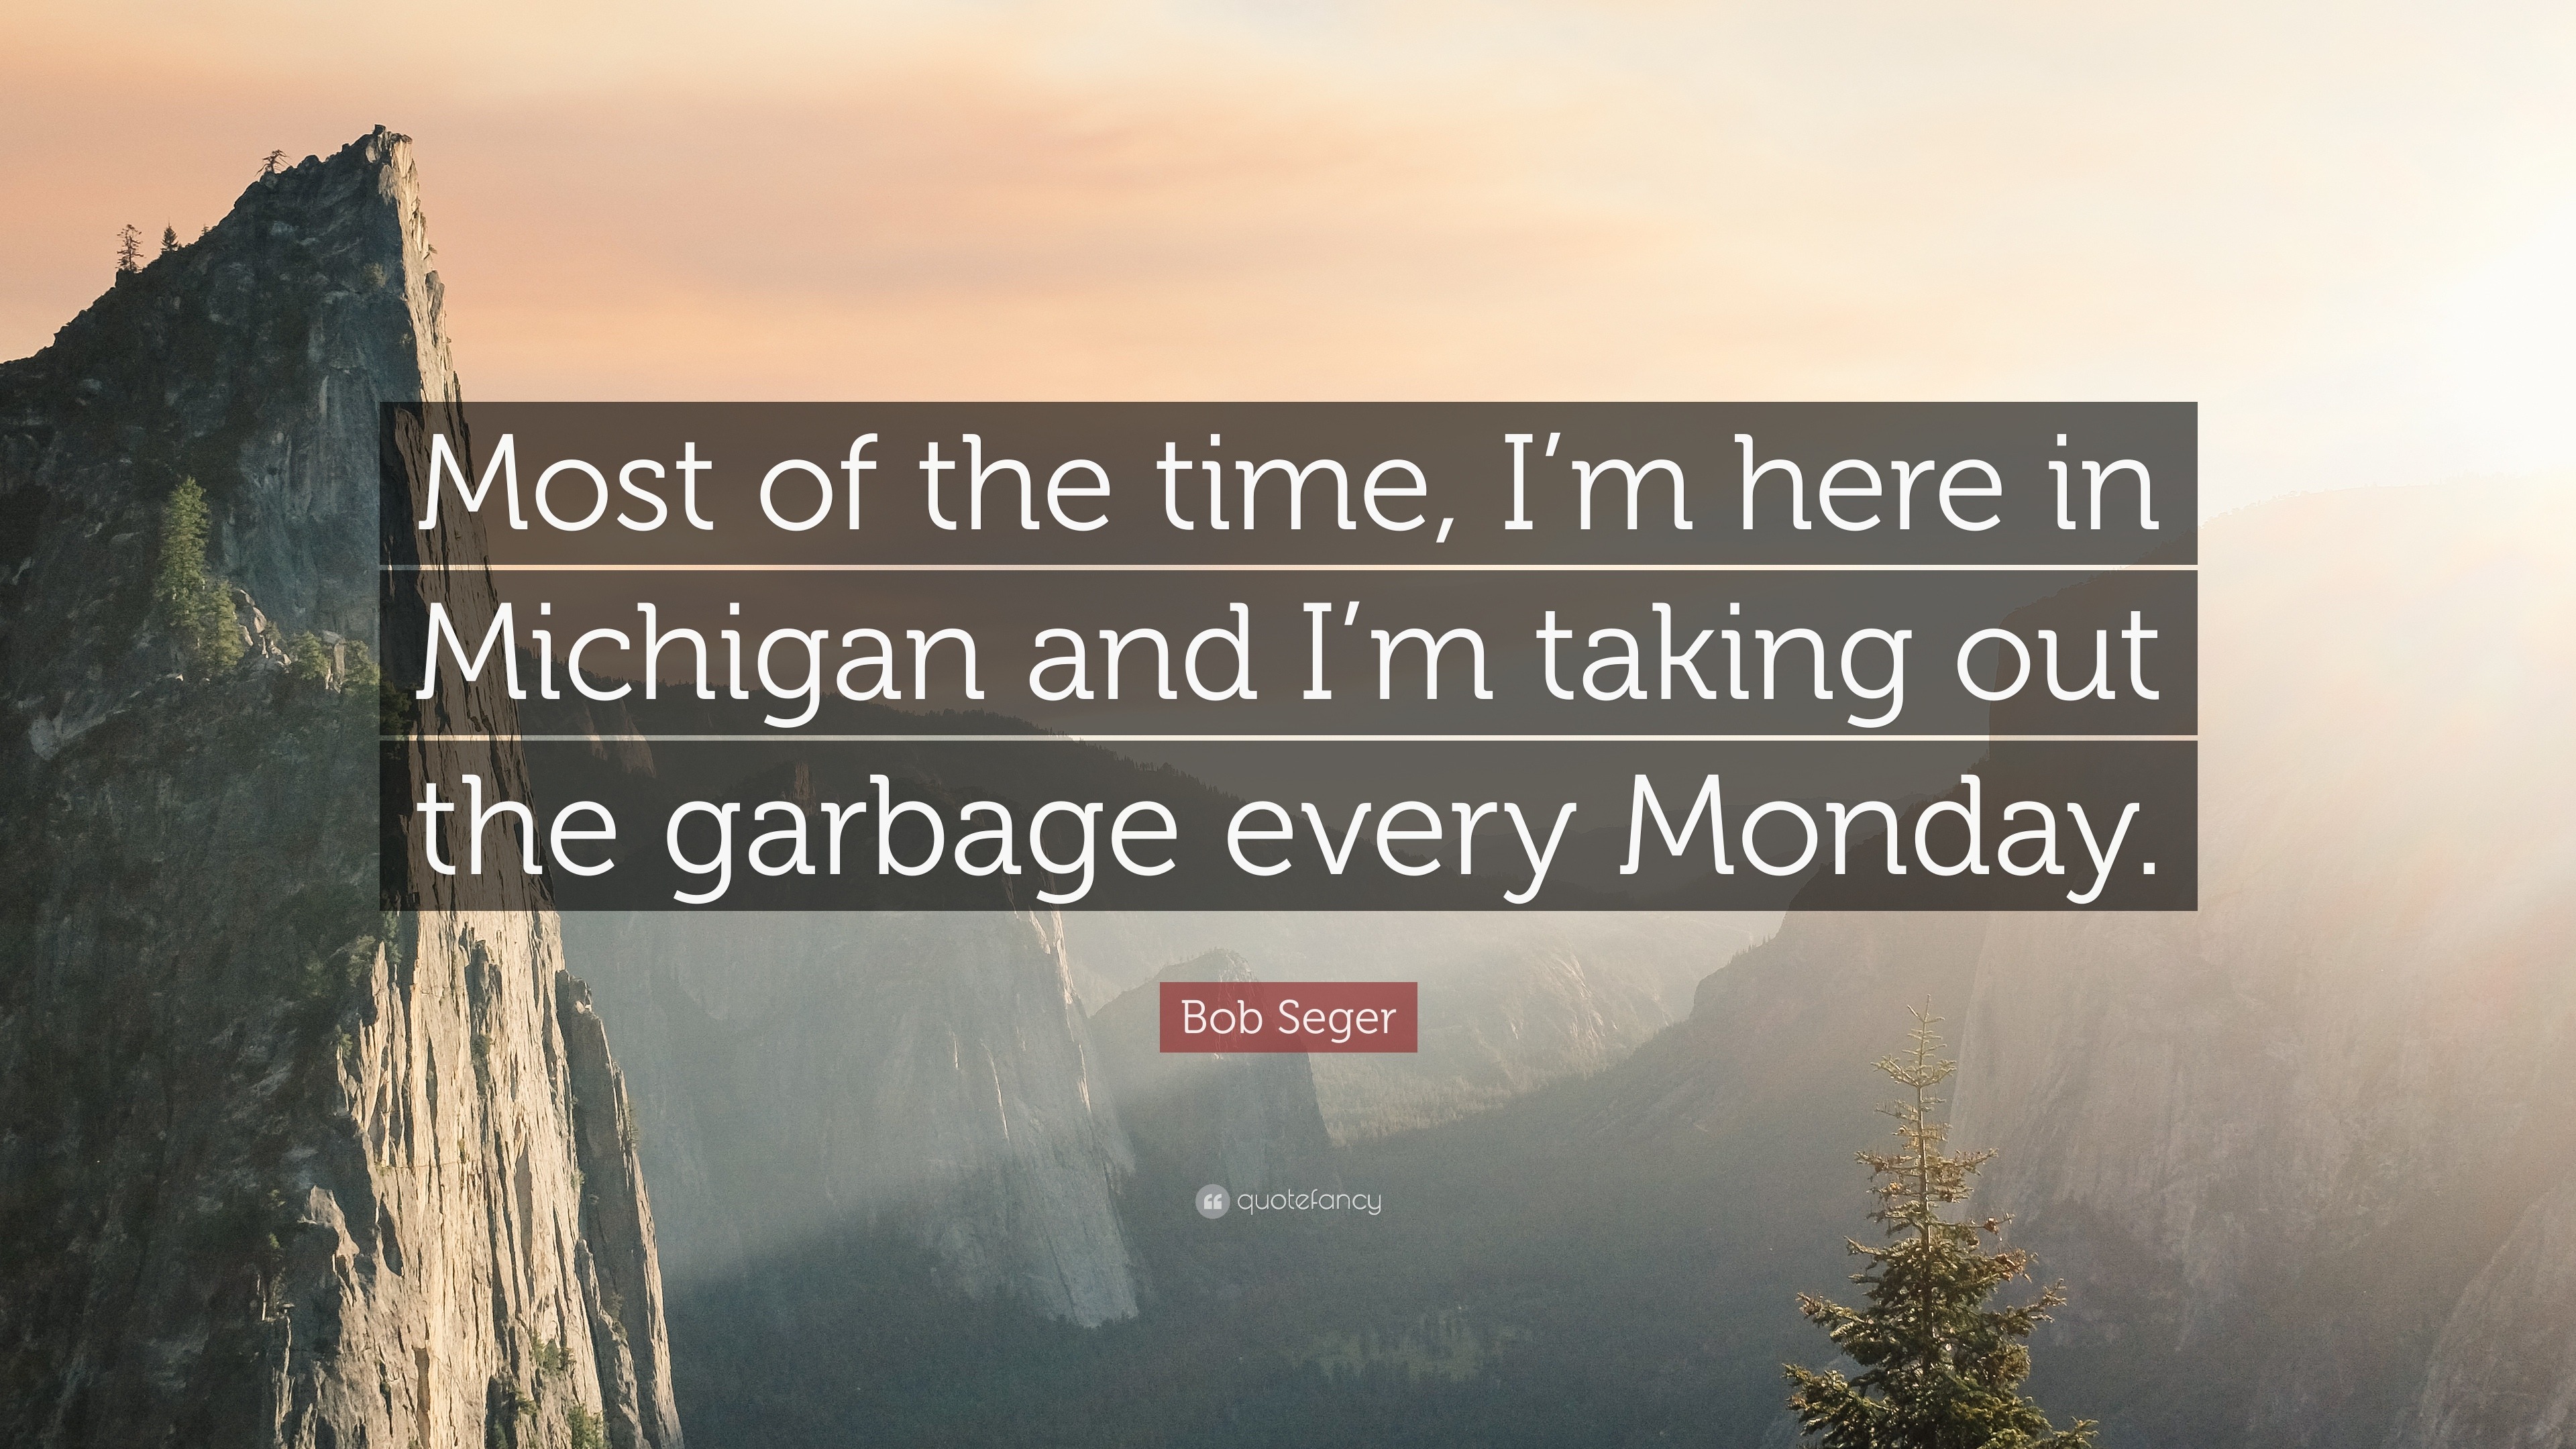 https://quotefancy.com/media/wallpaper/3840x2160/1088122-Bob-Seger-Quote-Most-of-the-time-I-m-here-in-Michigan-and-I-m.jpg